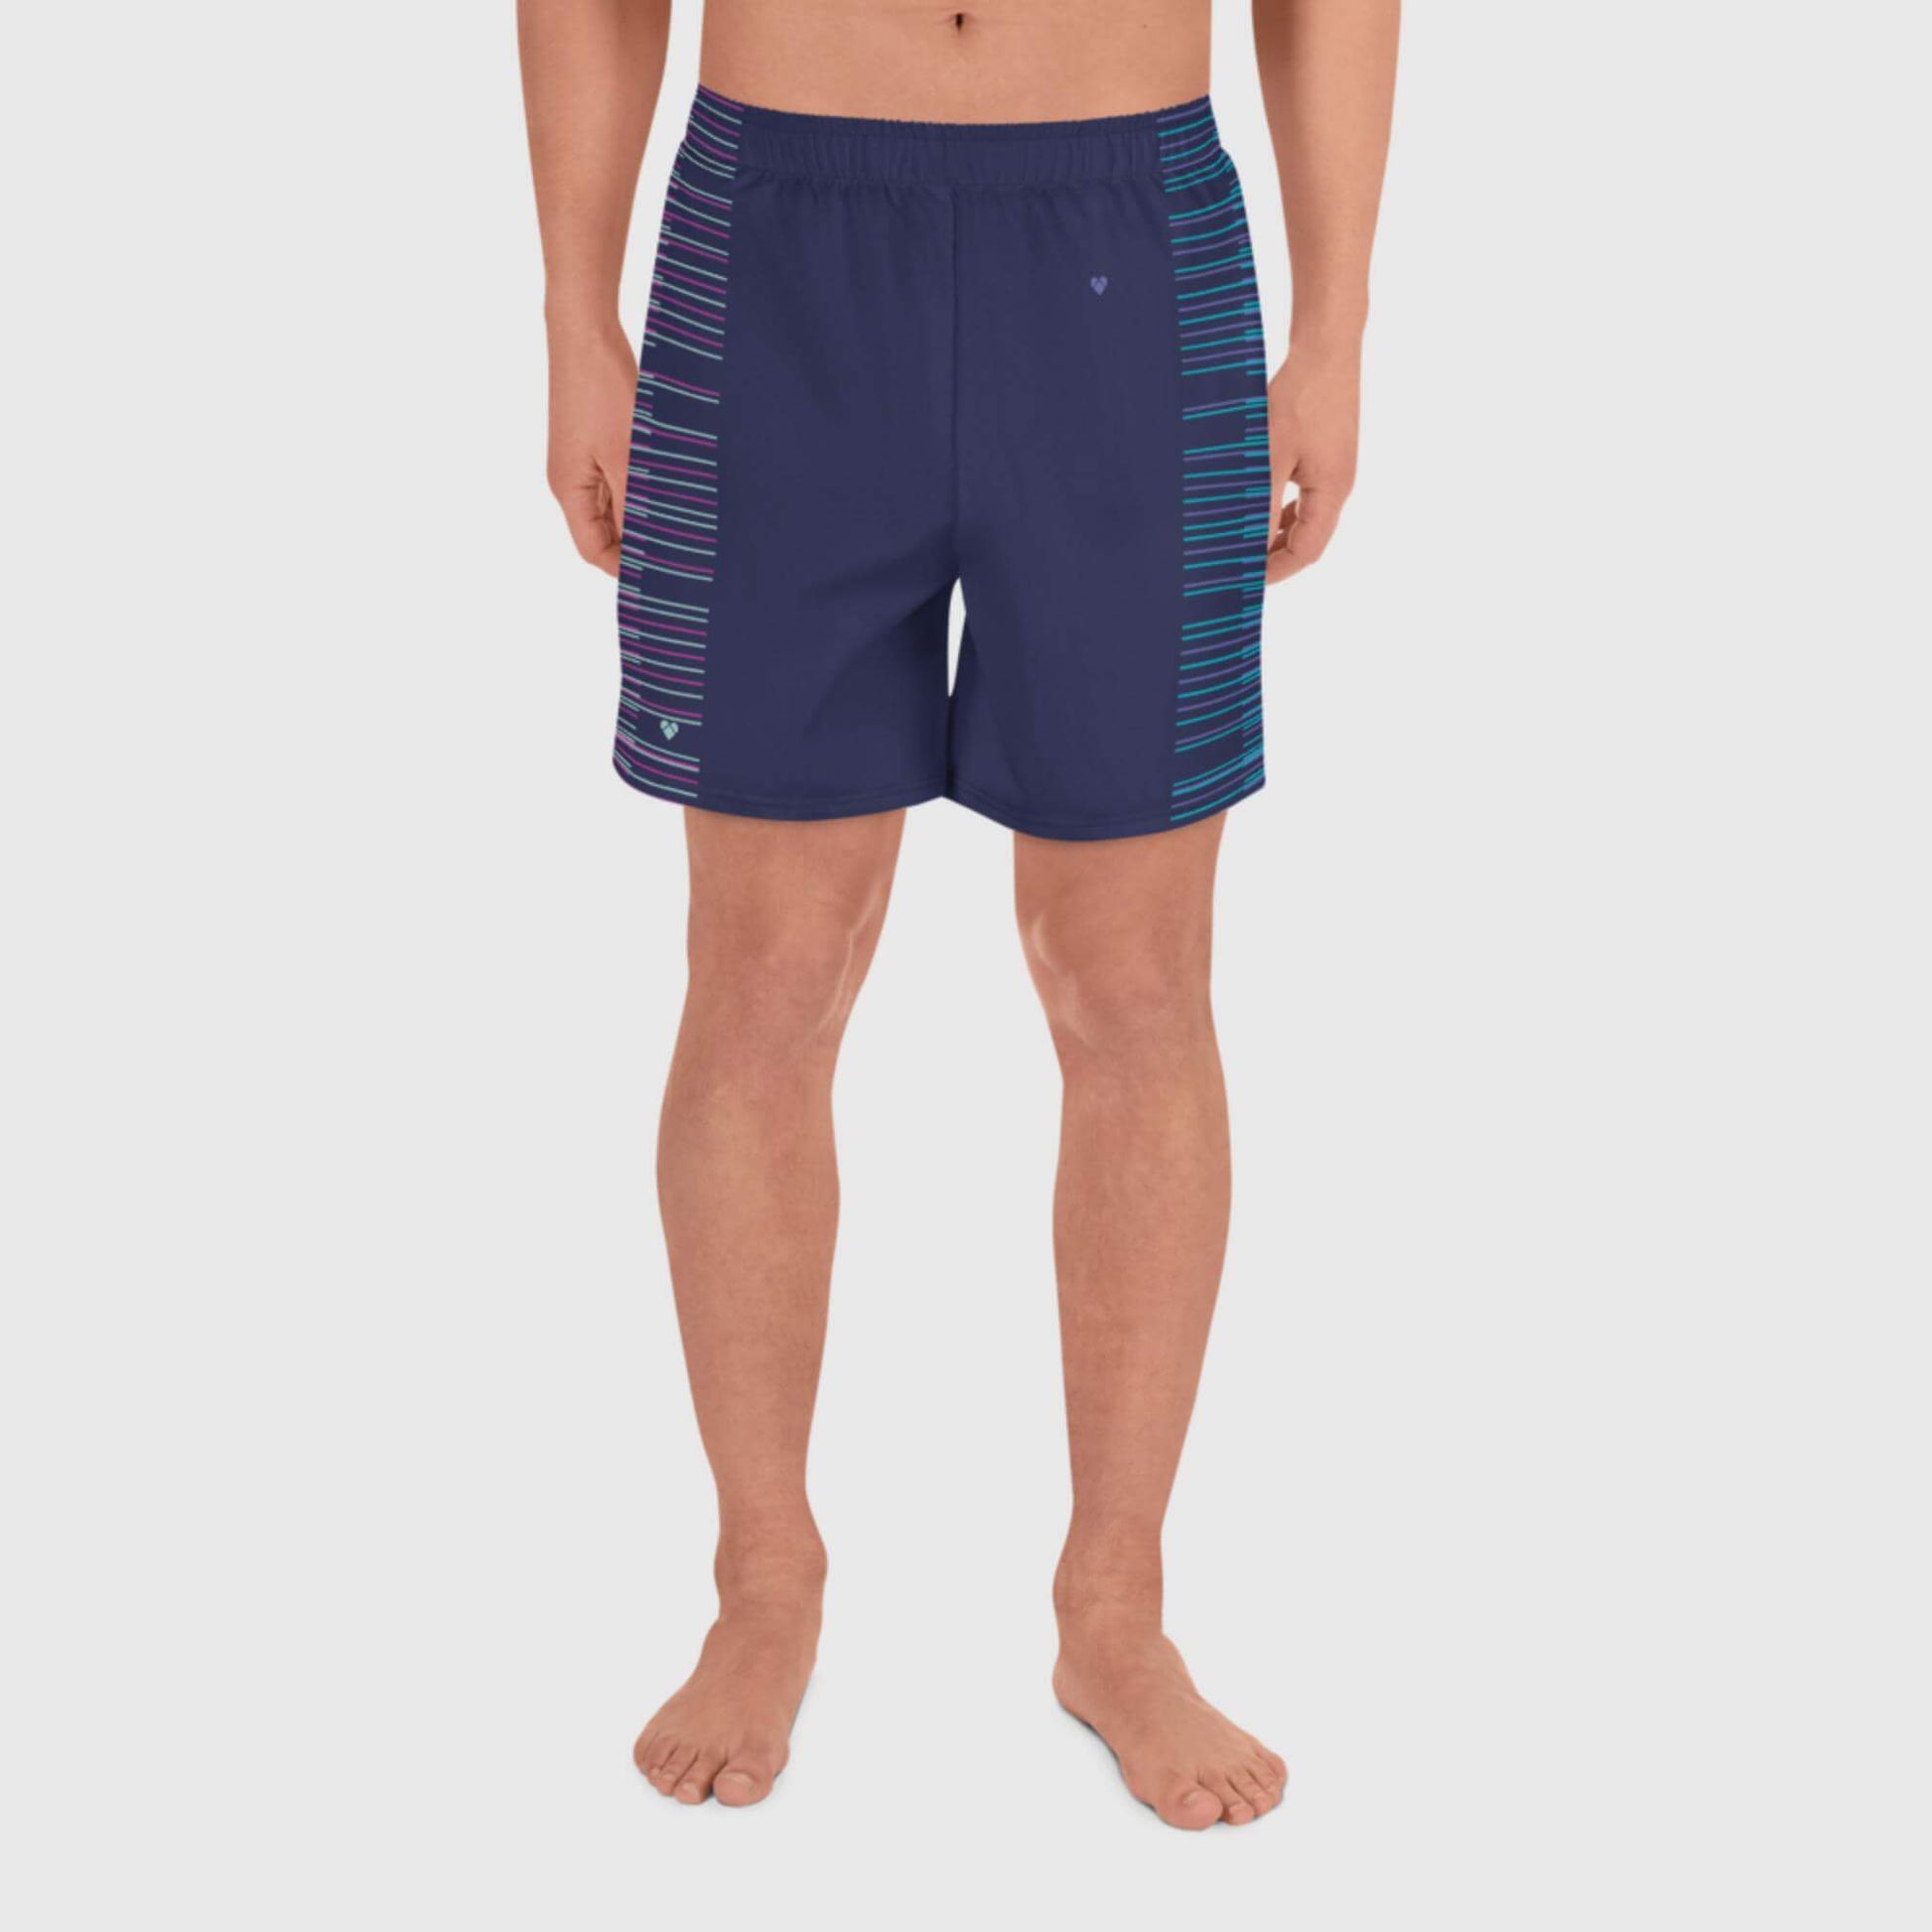 Unleash your inner athlete with CRiZ AMOR's Dual Sport Shorts in Slate Blue